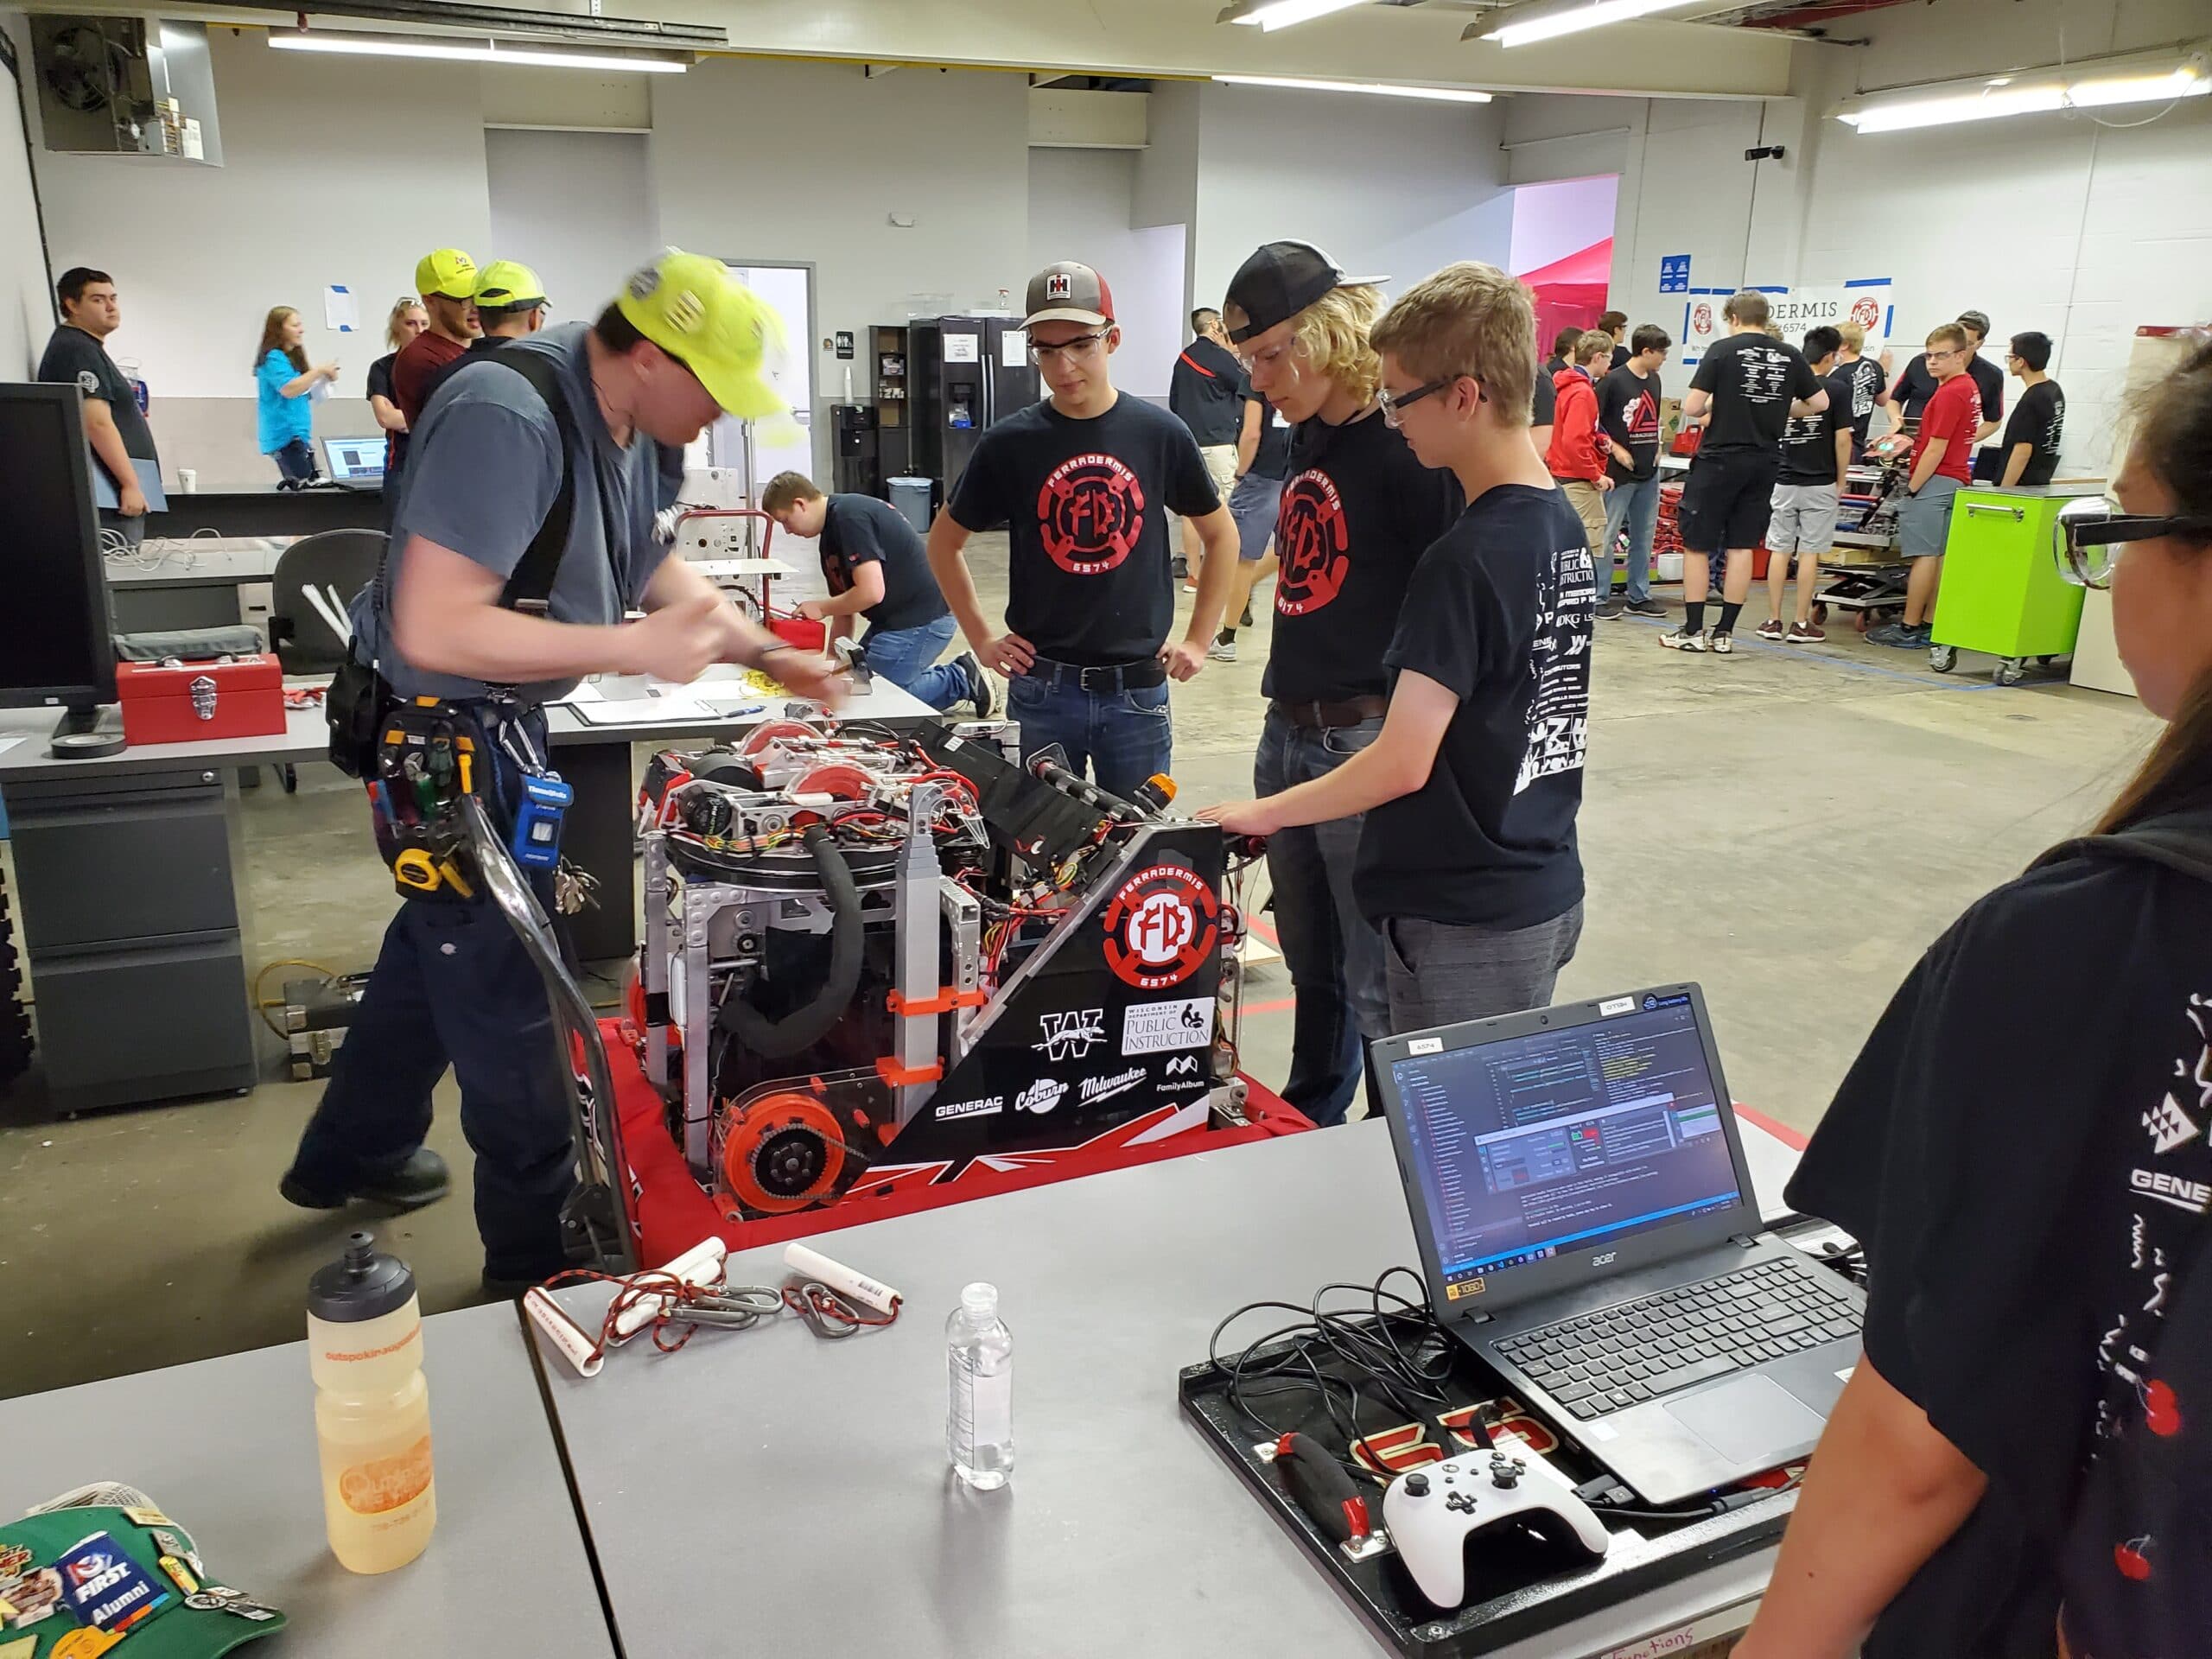 Getting the Robot Officially Inspected before Competition Begins